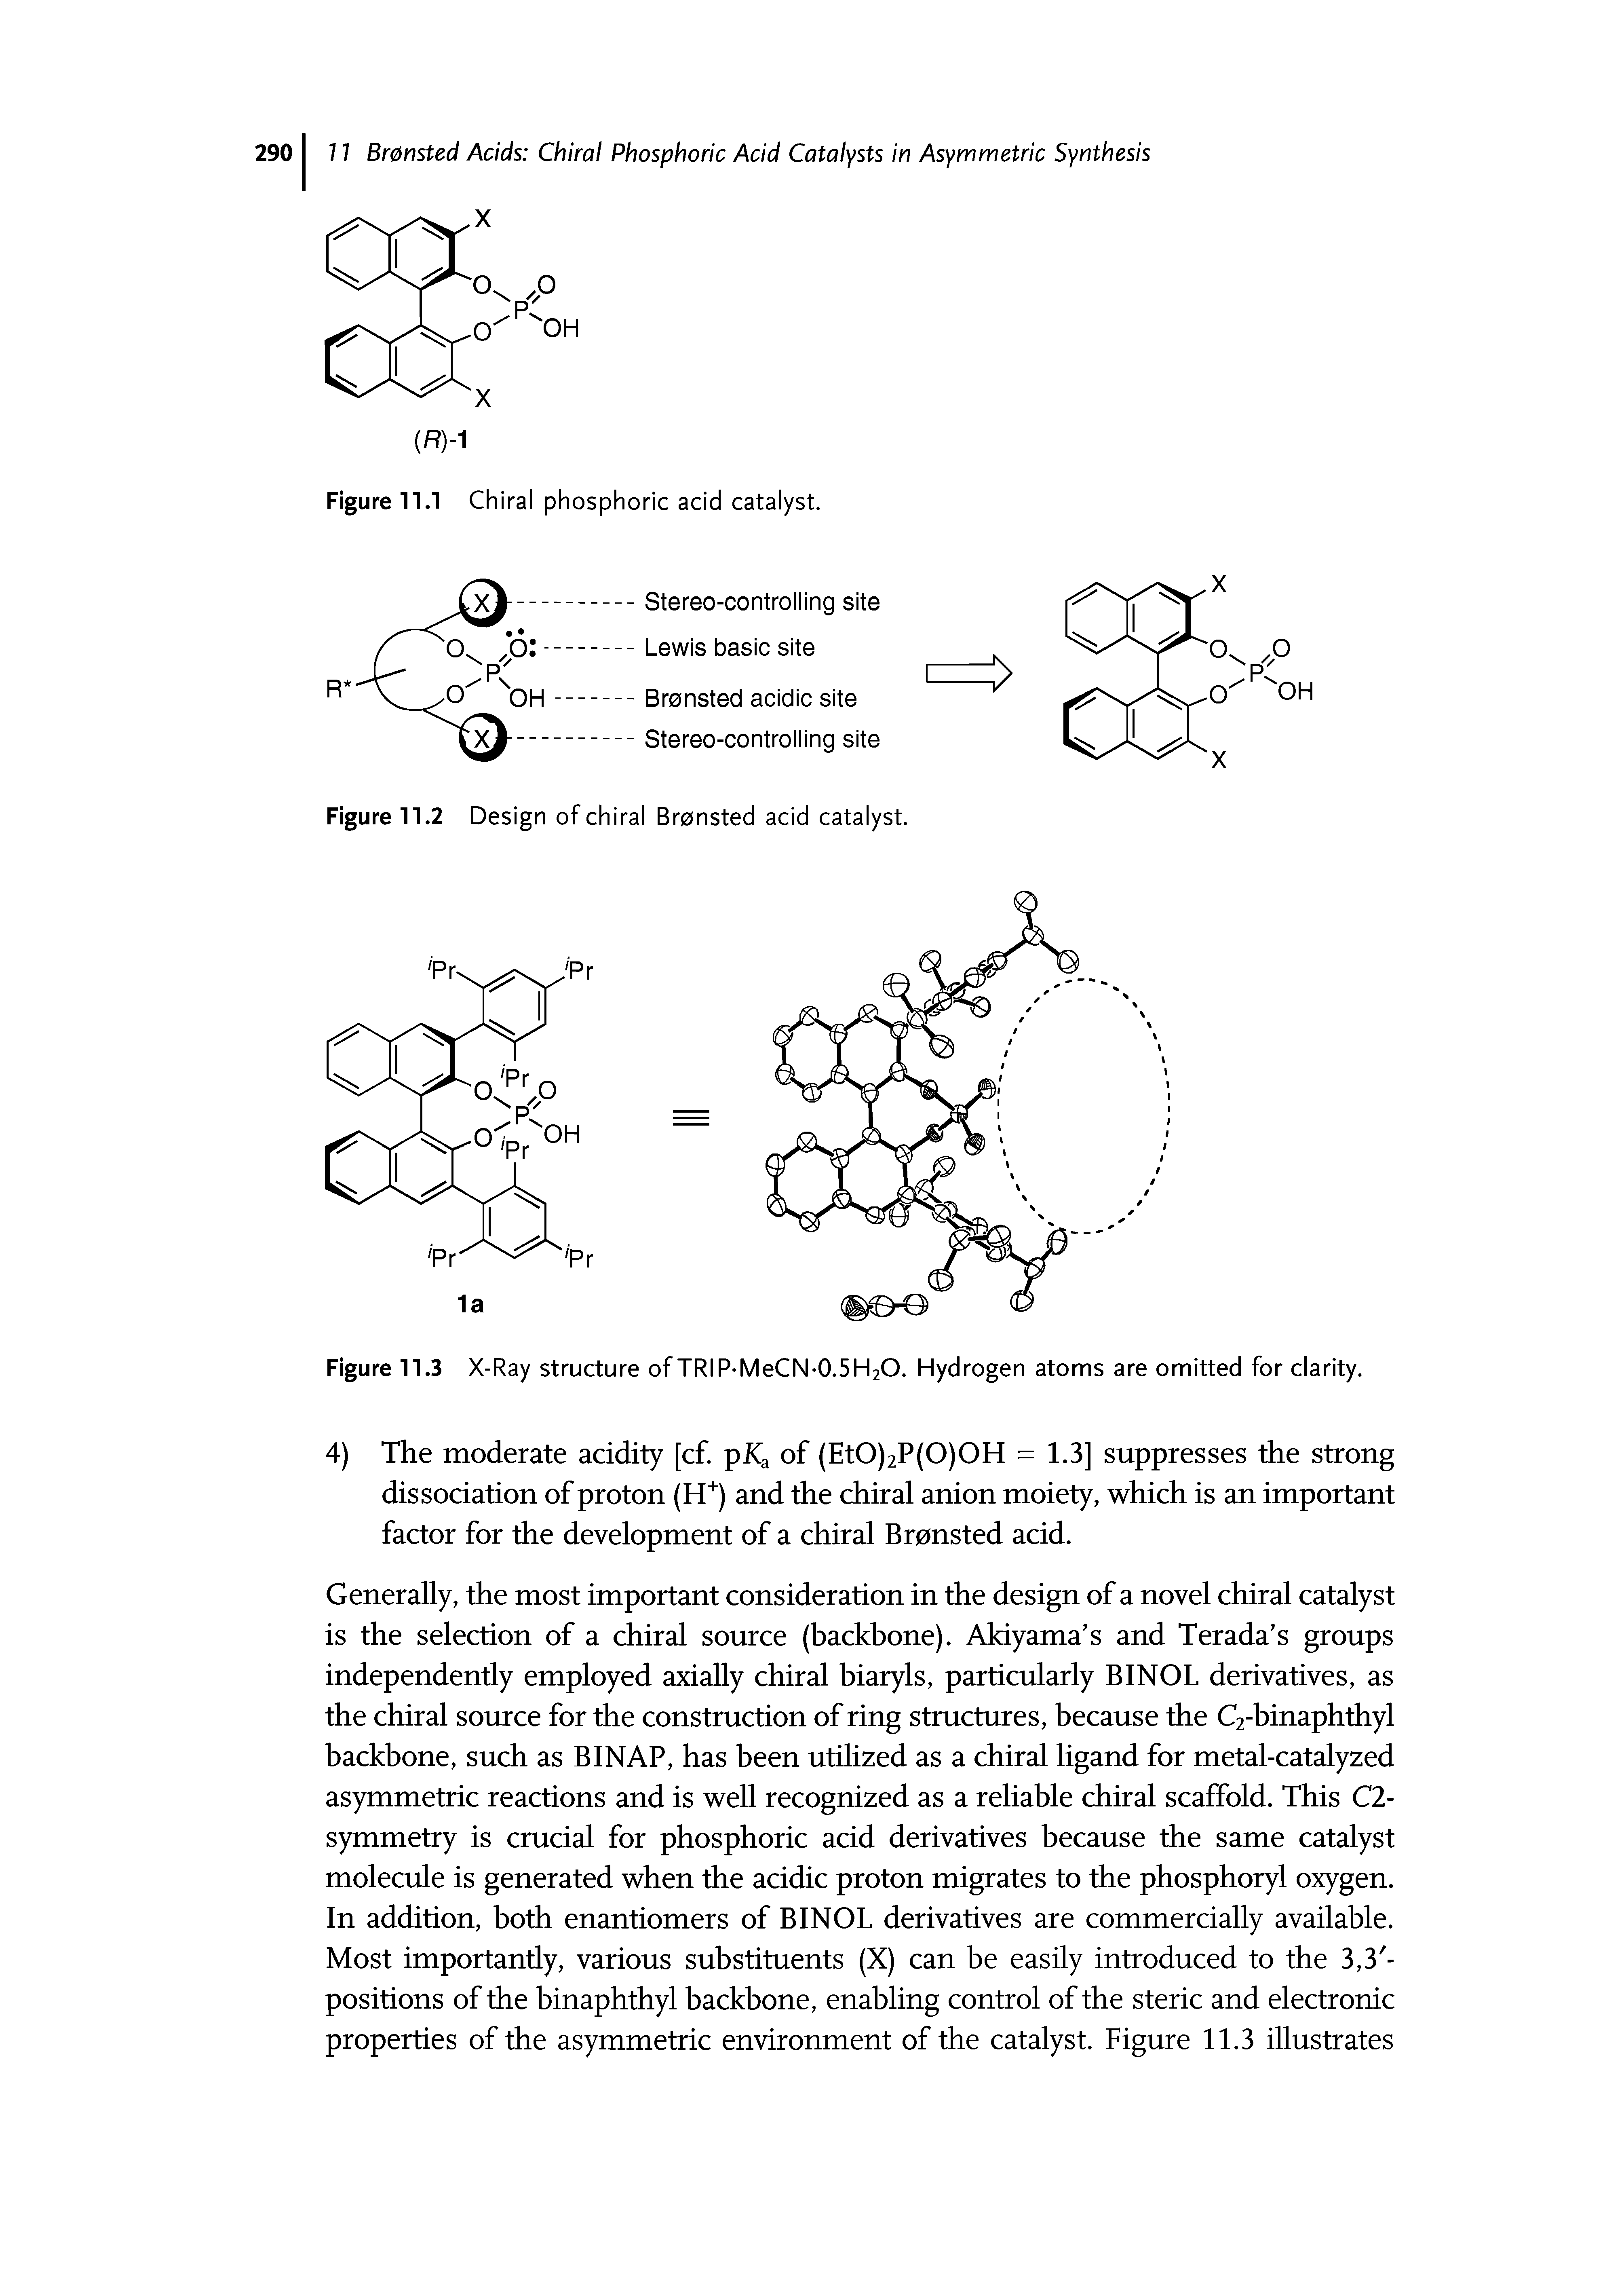 Figure 11.2 Design of chiral Bronsted acid catalyst.